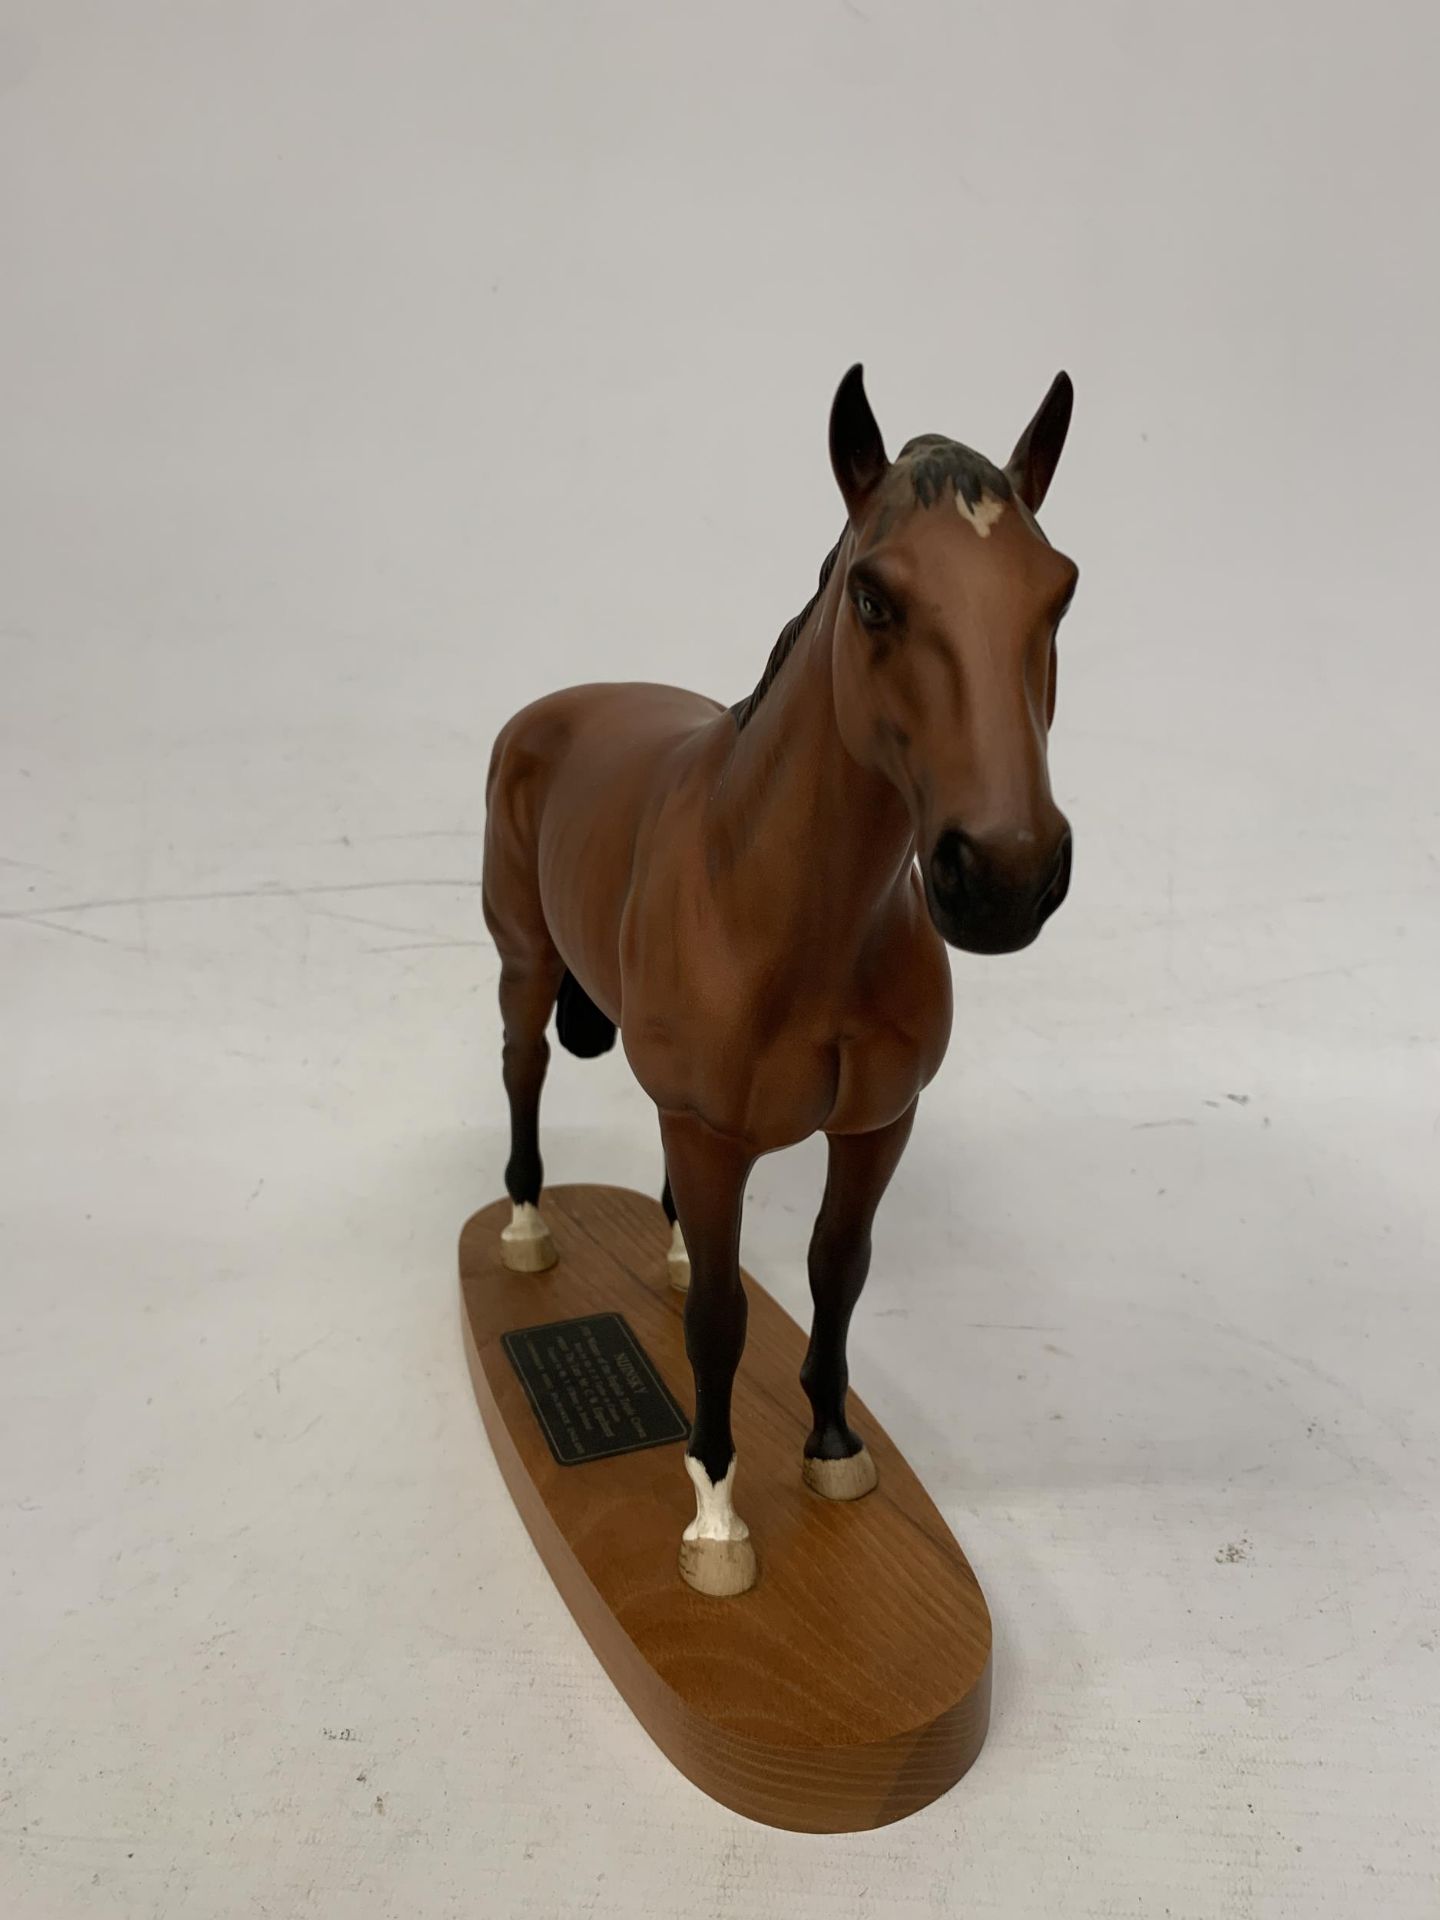 A BESWICK "NIJINSKY" HORSE FIGURINE FROM THE CONNOISSEUR HORSES SERIES WINNER OF THE TRIPLE CROWN - Image 2 of 5